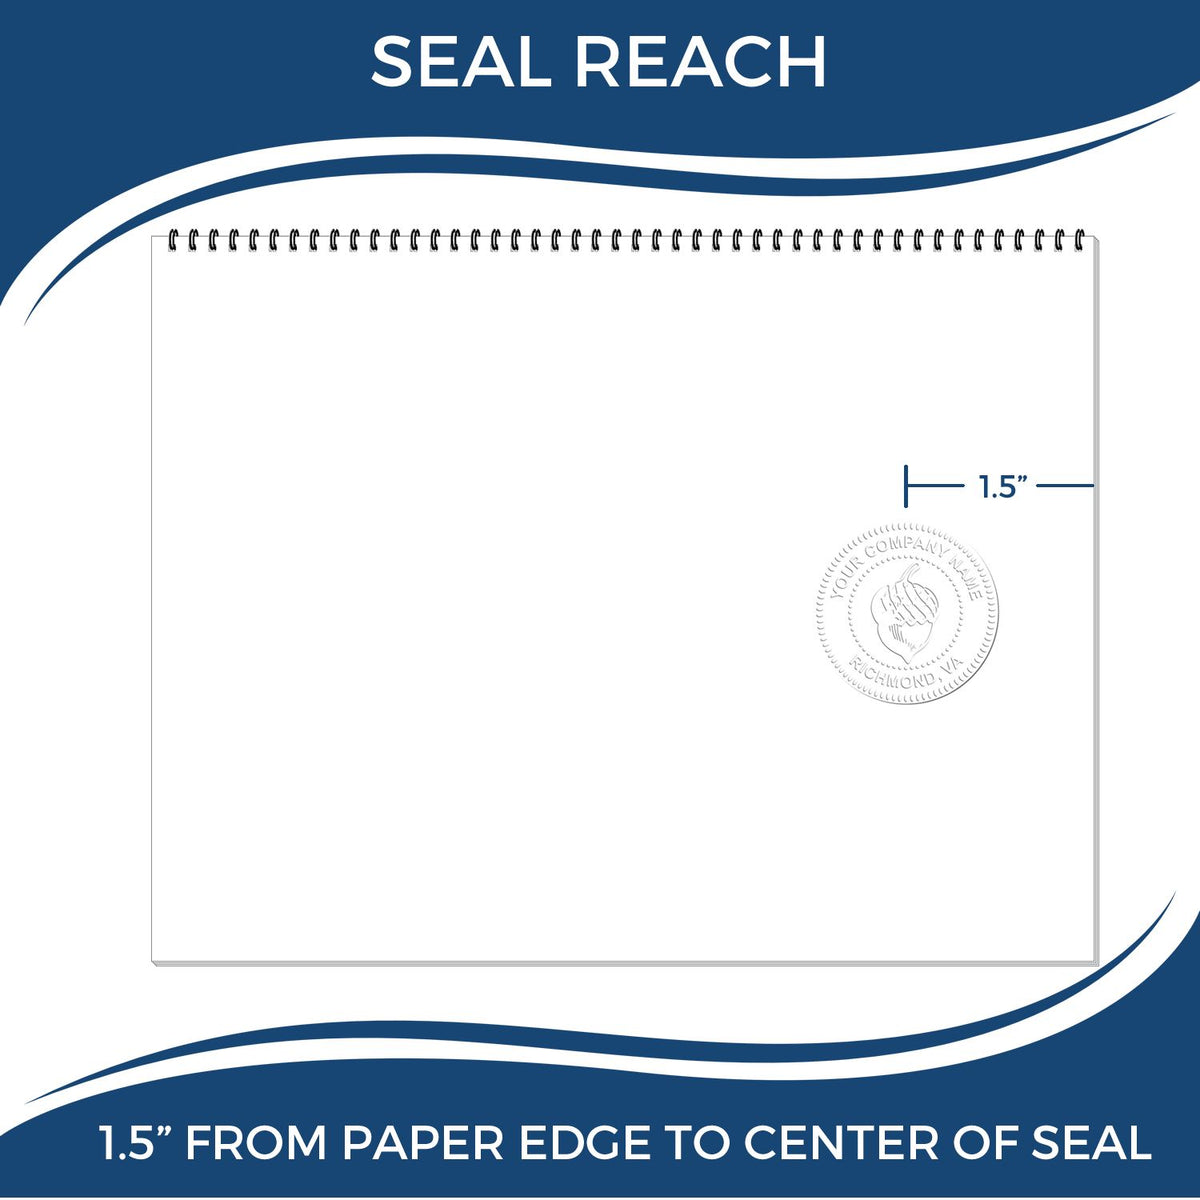 An infographic showing the seal reach which is represented by a ruler and a miniature seal image of the Hybrid Kentucky Land Surveyor Seal